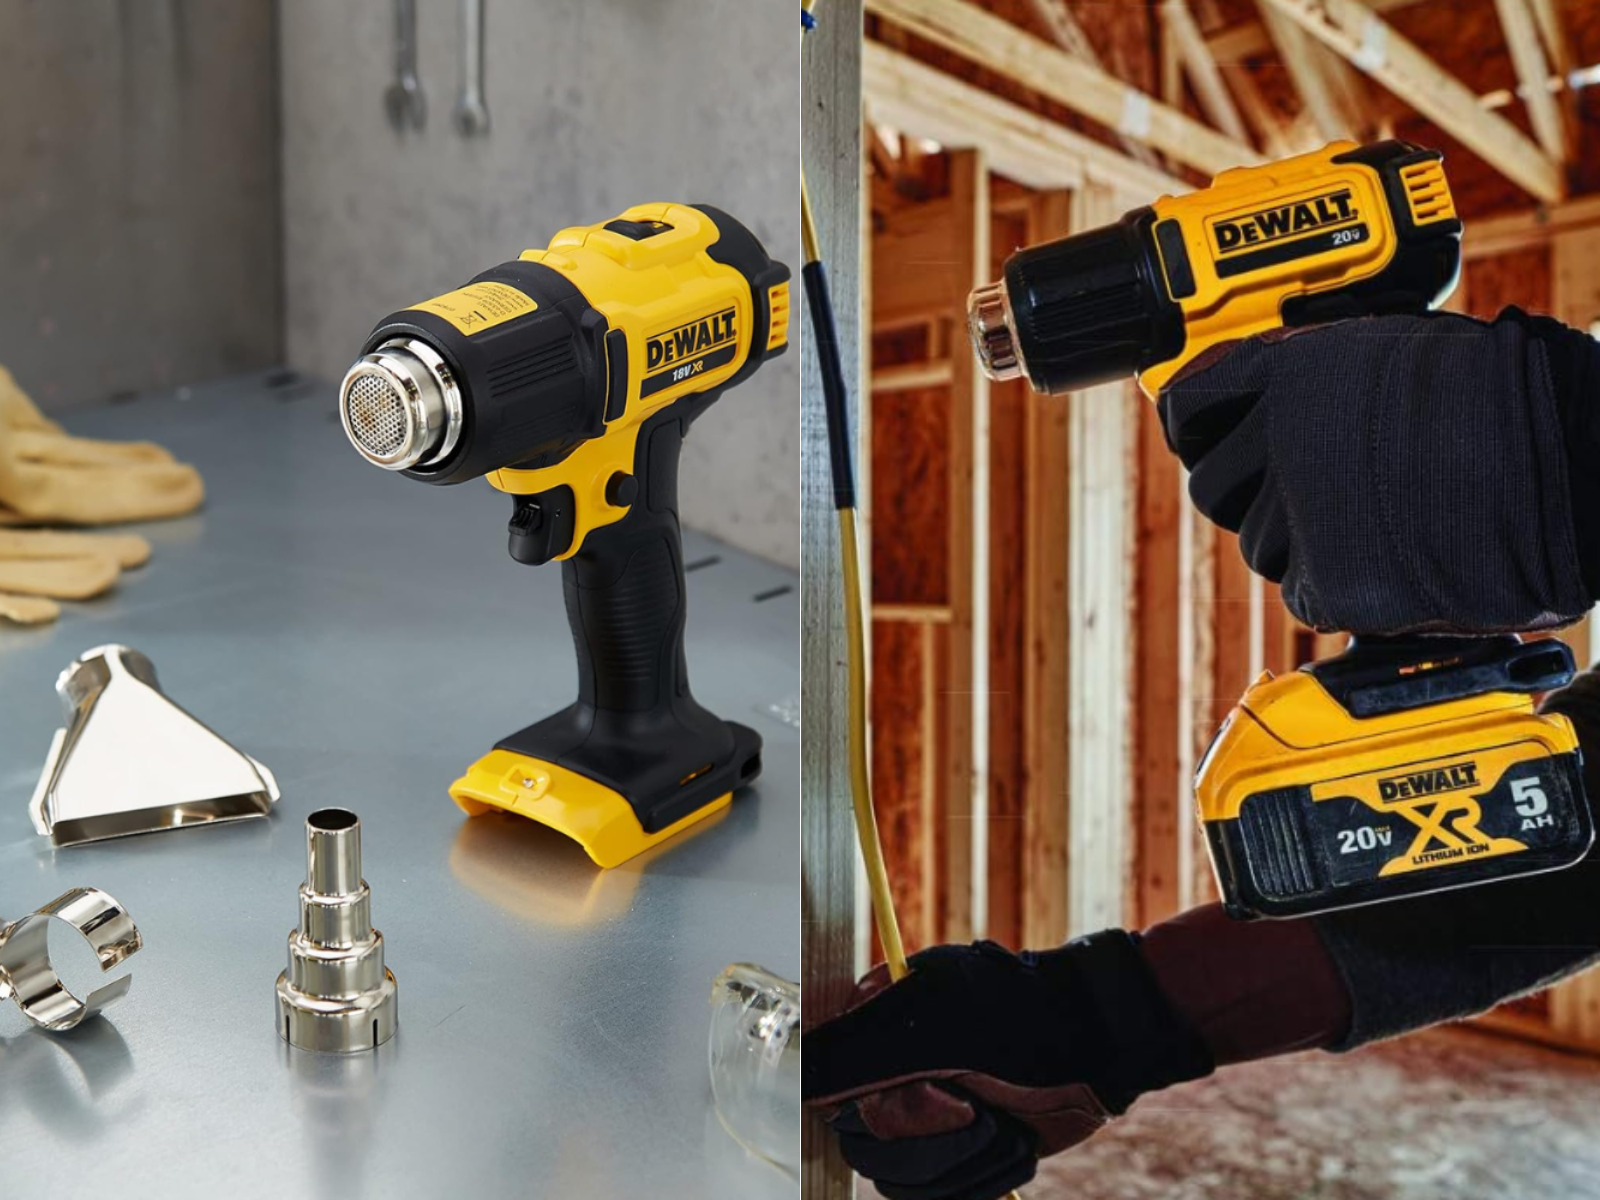 A 18v and 20V Max heat gun used in different scenarios.